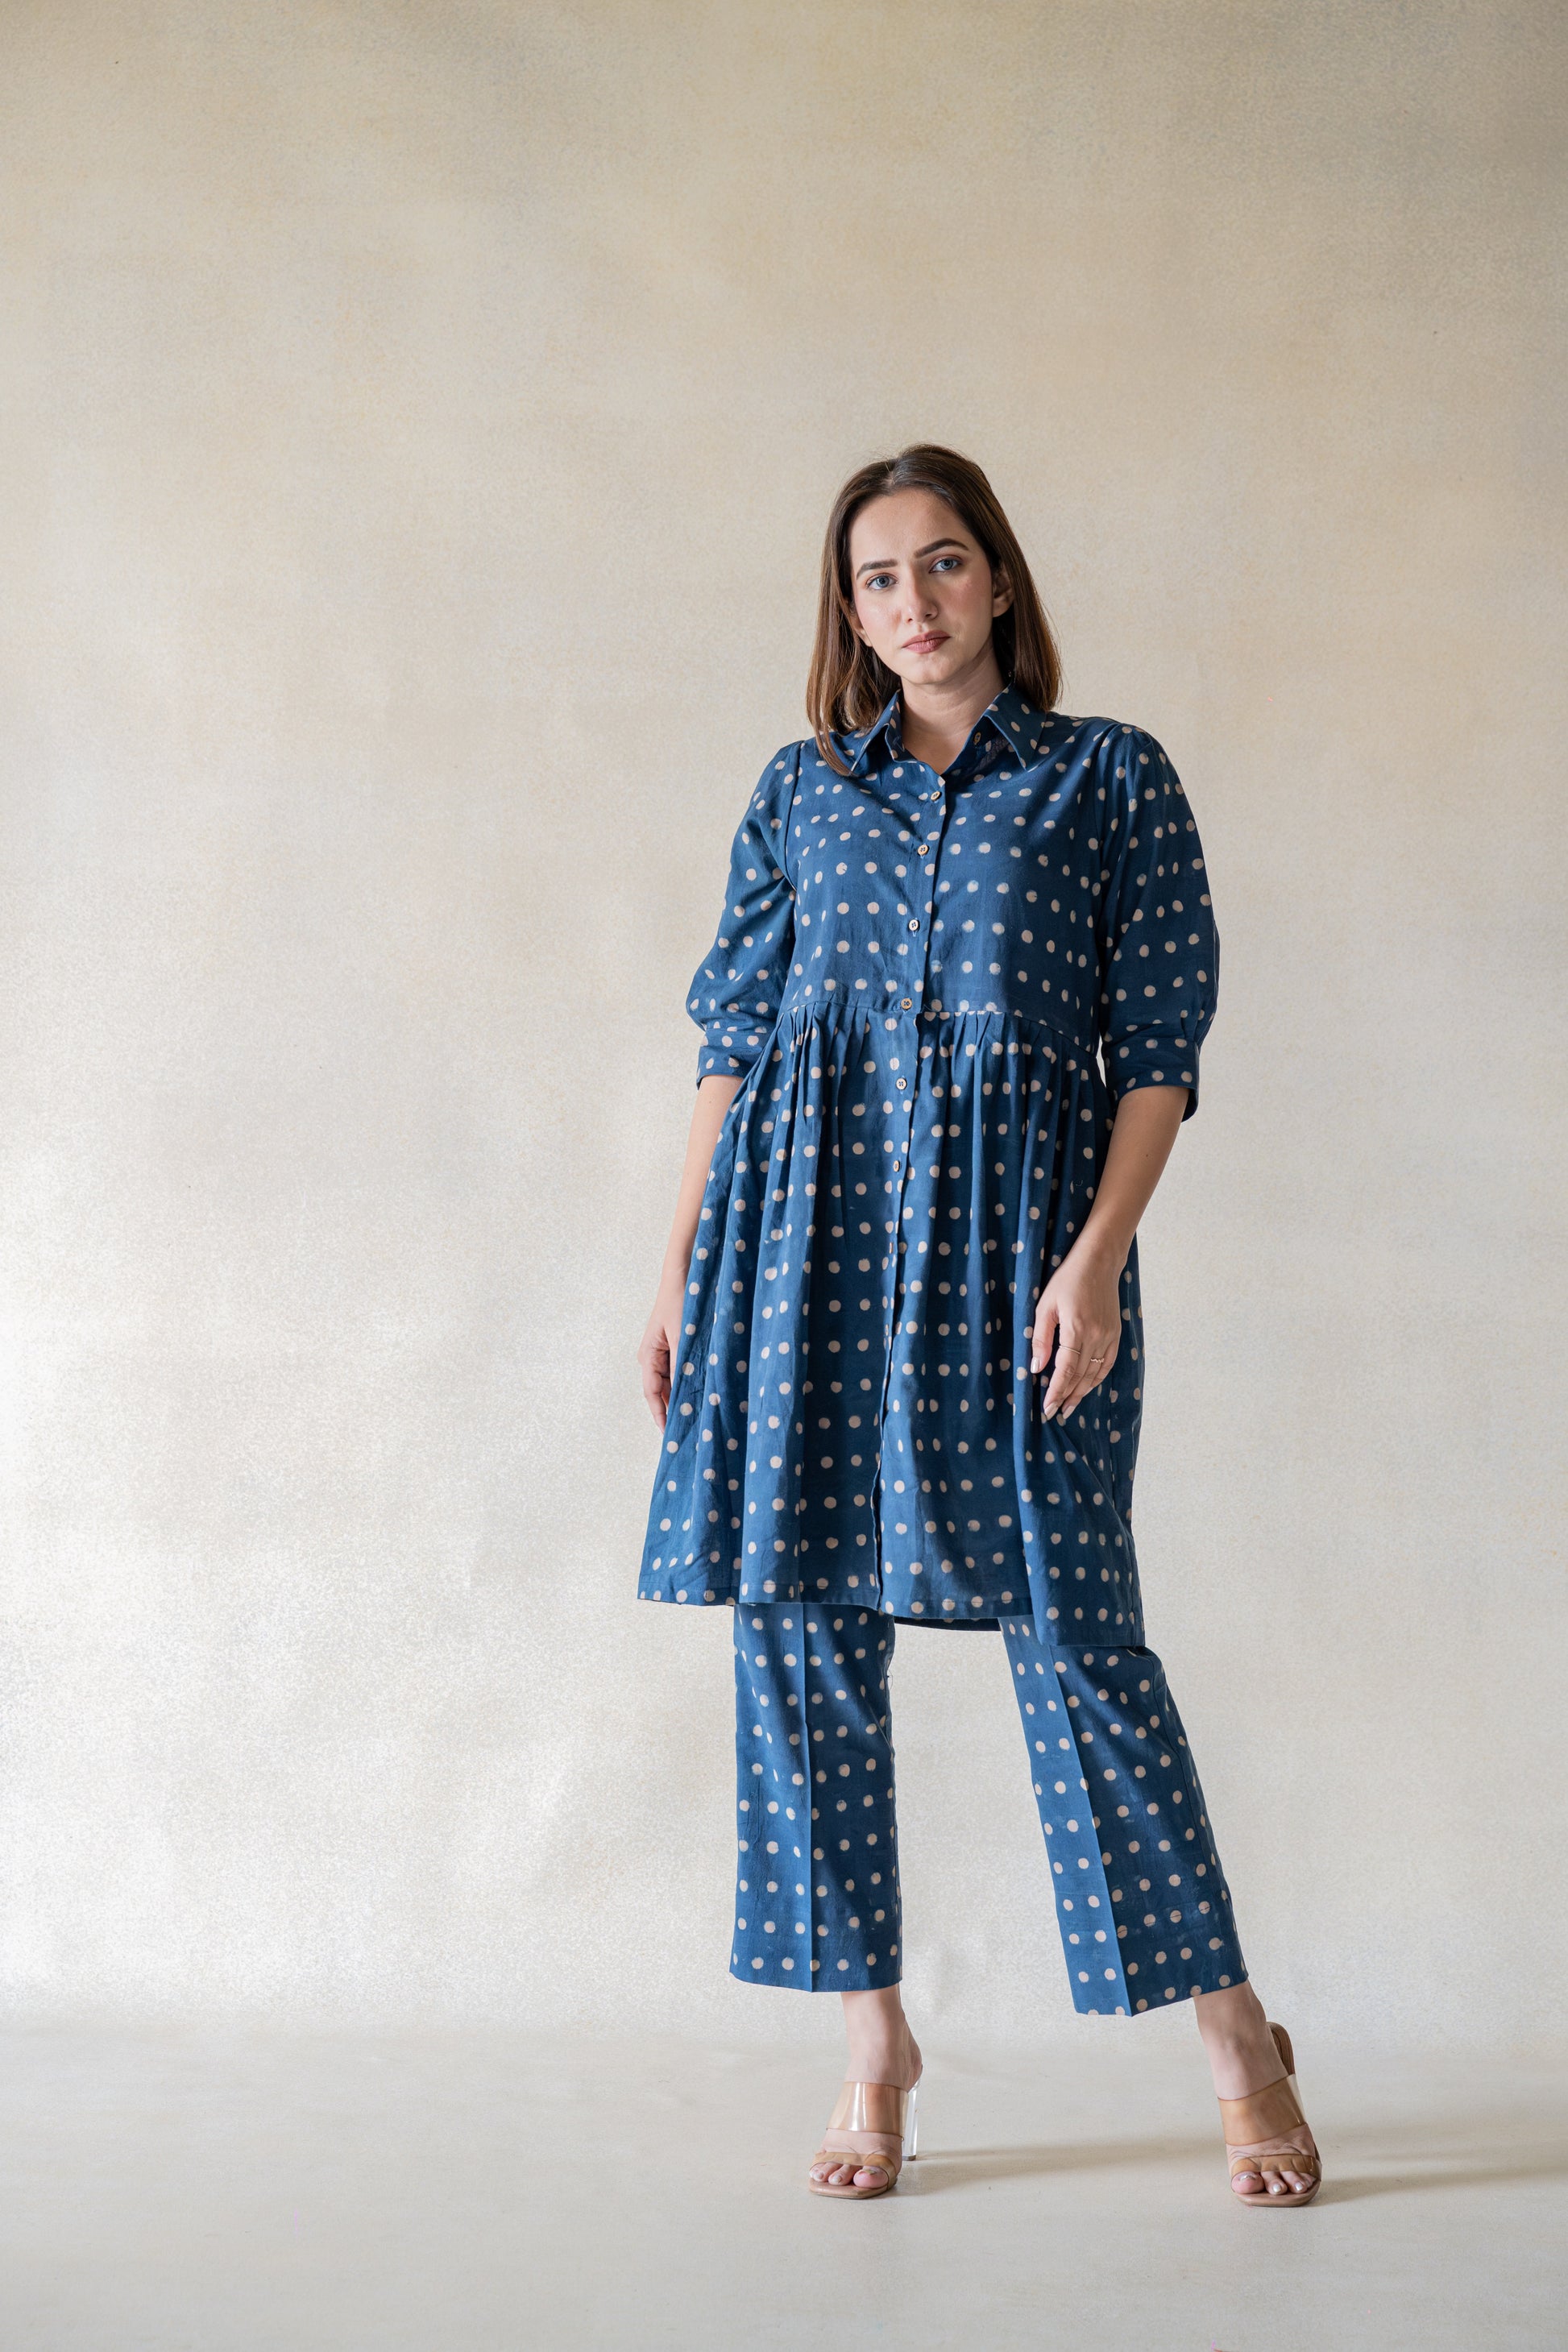 Get ready to make a statement with our Starry Indigo Daydream coord set! The ajrakh hand block printed polka dots add a unique touch to this chic and classy ensemble. The subtle waist gather on the flowy shirt and elasticated waist pants make this the perfect comfortable yet stylish choice for modern women.